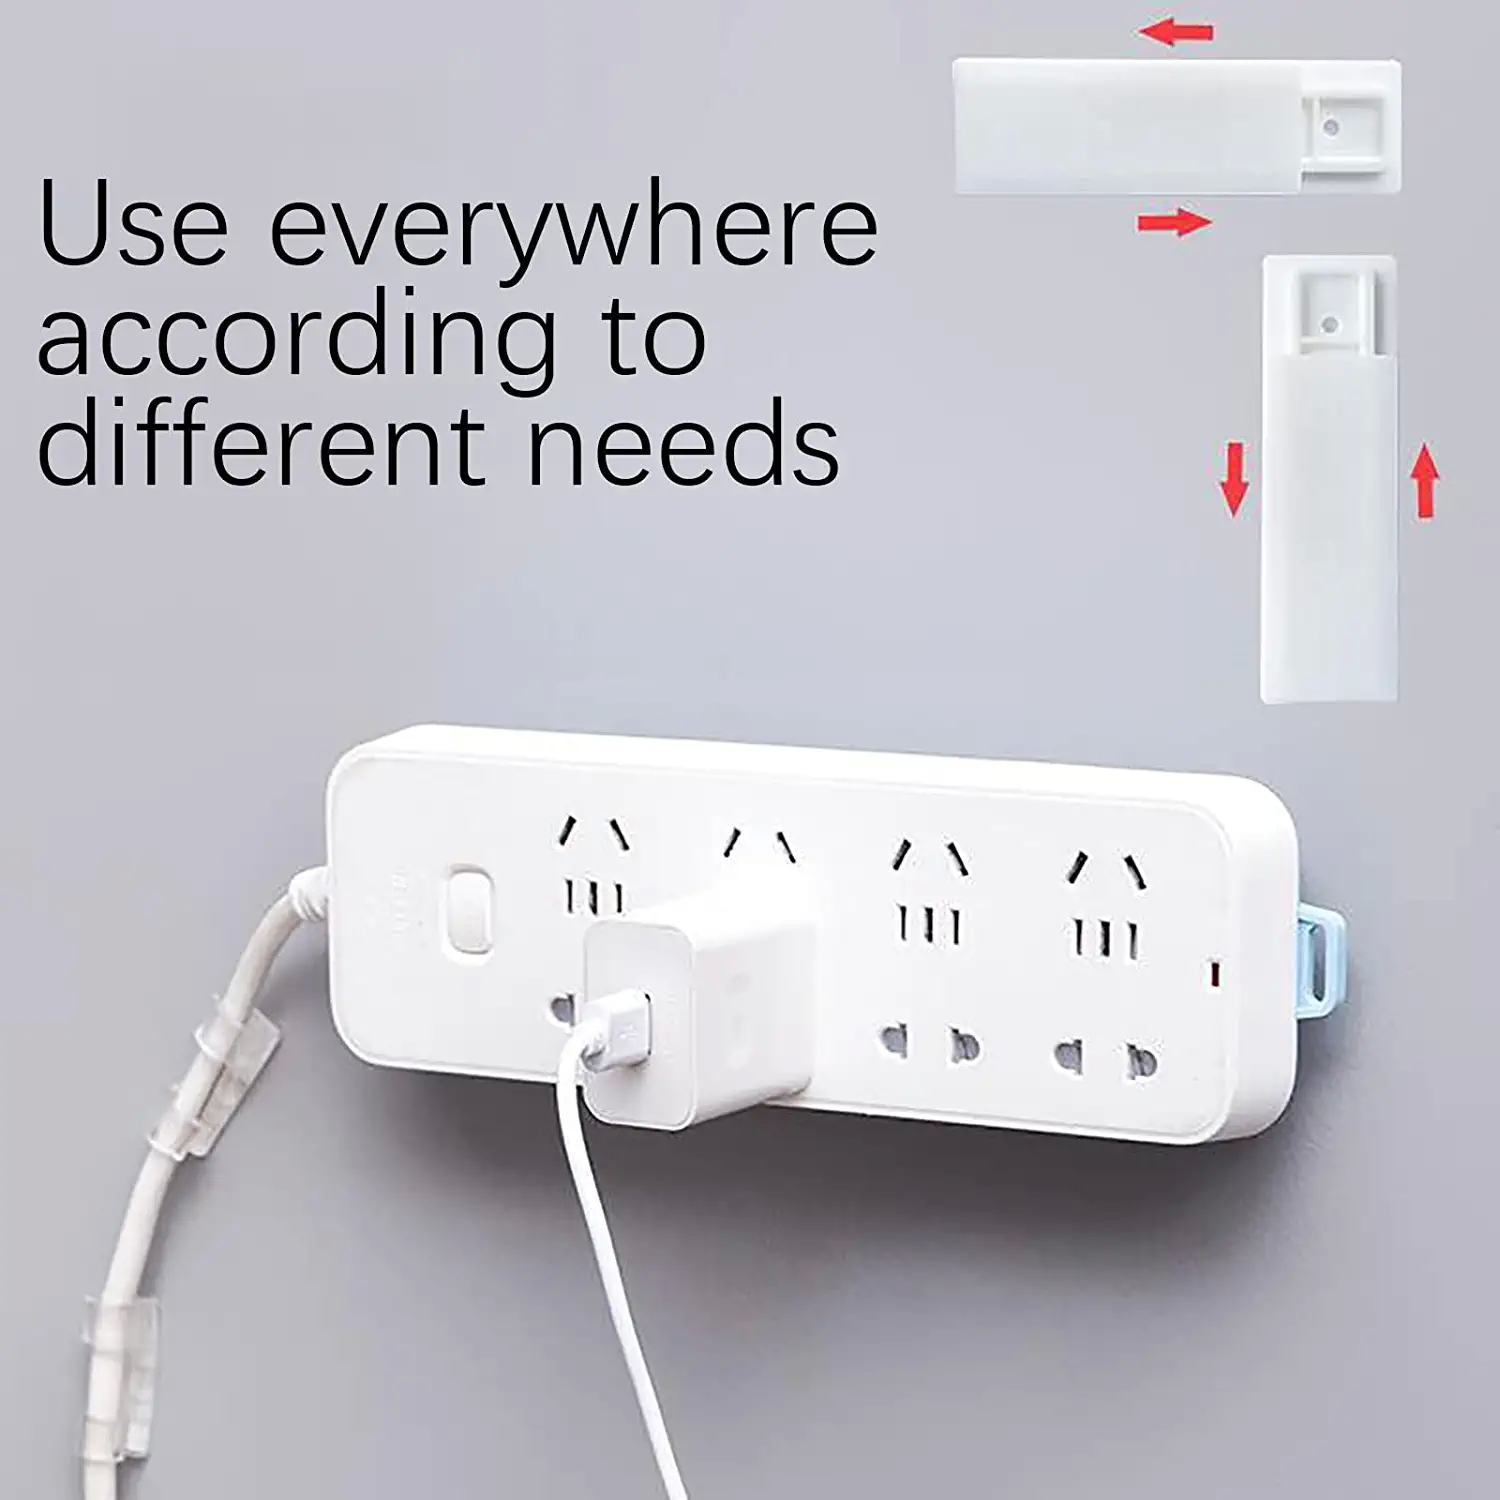 Internal-Power-Cables-Self-Adhesive-Power-Strip-Wall-Mount-Fixator-Power-Strip-Desk-Wall-Mount-Hmount-Simplest-Bracket-Stand-for-Power-Strip-WiFi-Router-Remote-Control-26